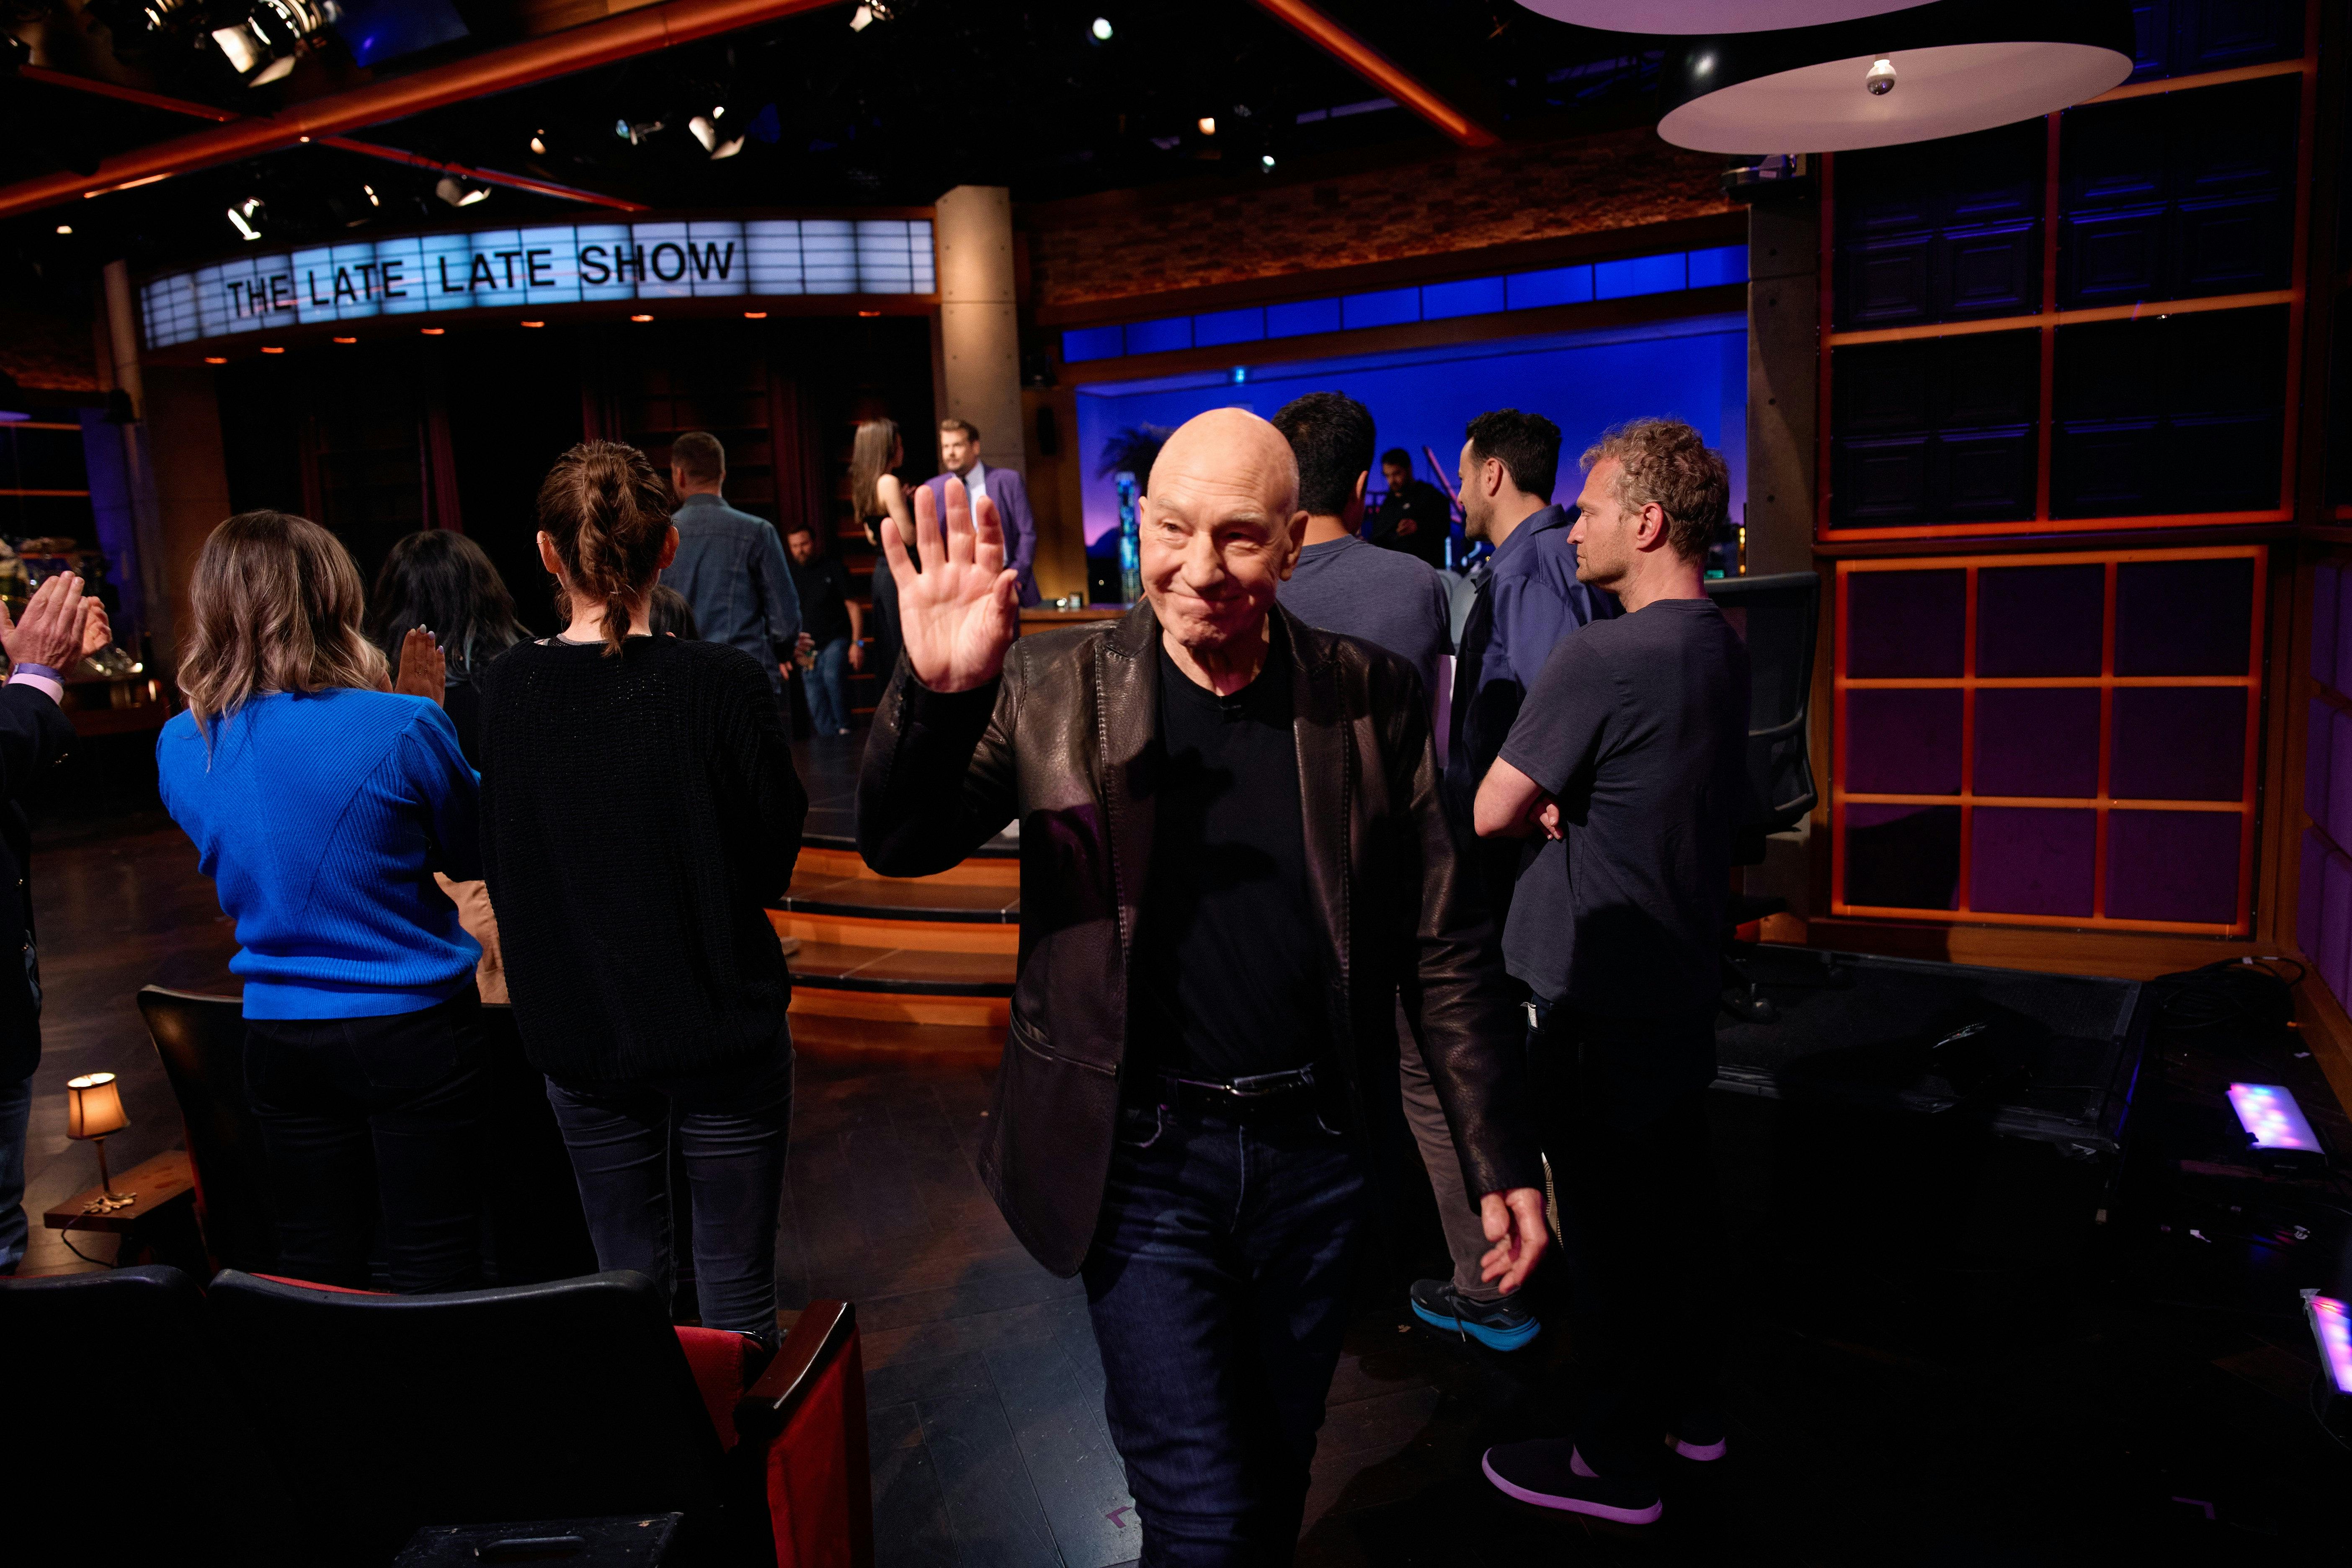 Patrick Stewart exiting the stage at The Late Late Show with James Corden